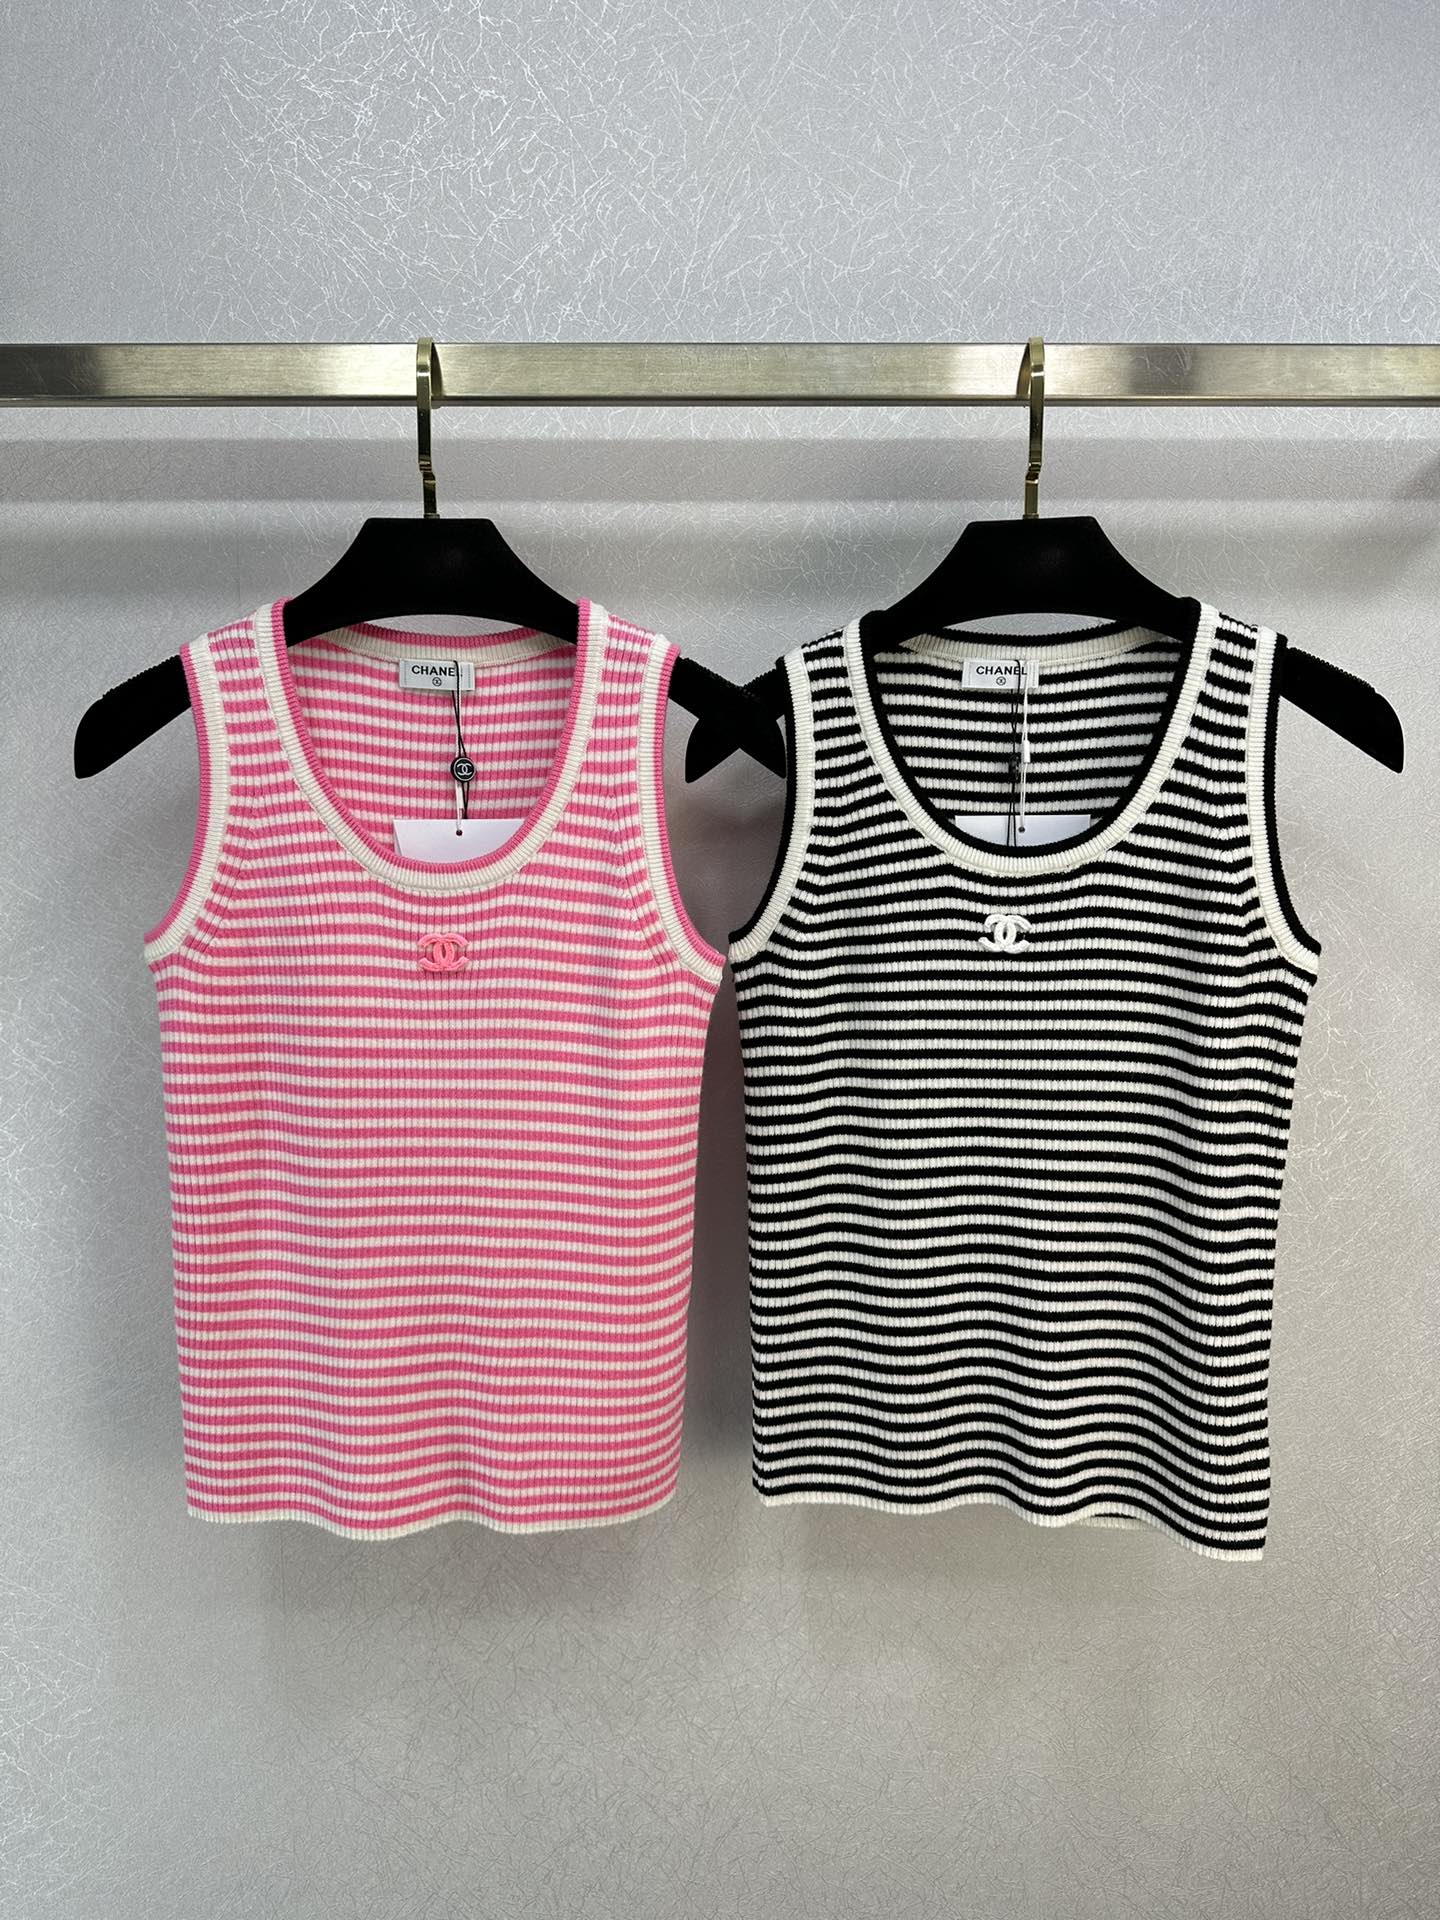 Chanel Clothing Tank Tops&Camis UK 7 Star Replica
 Cotton